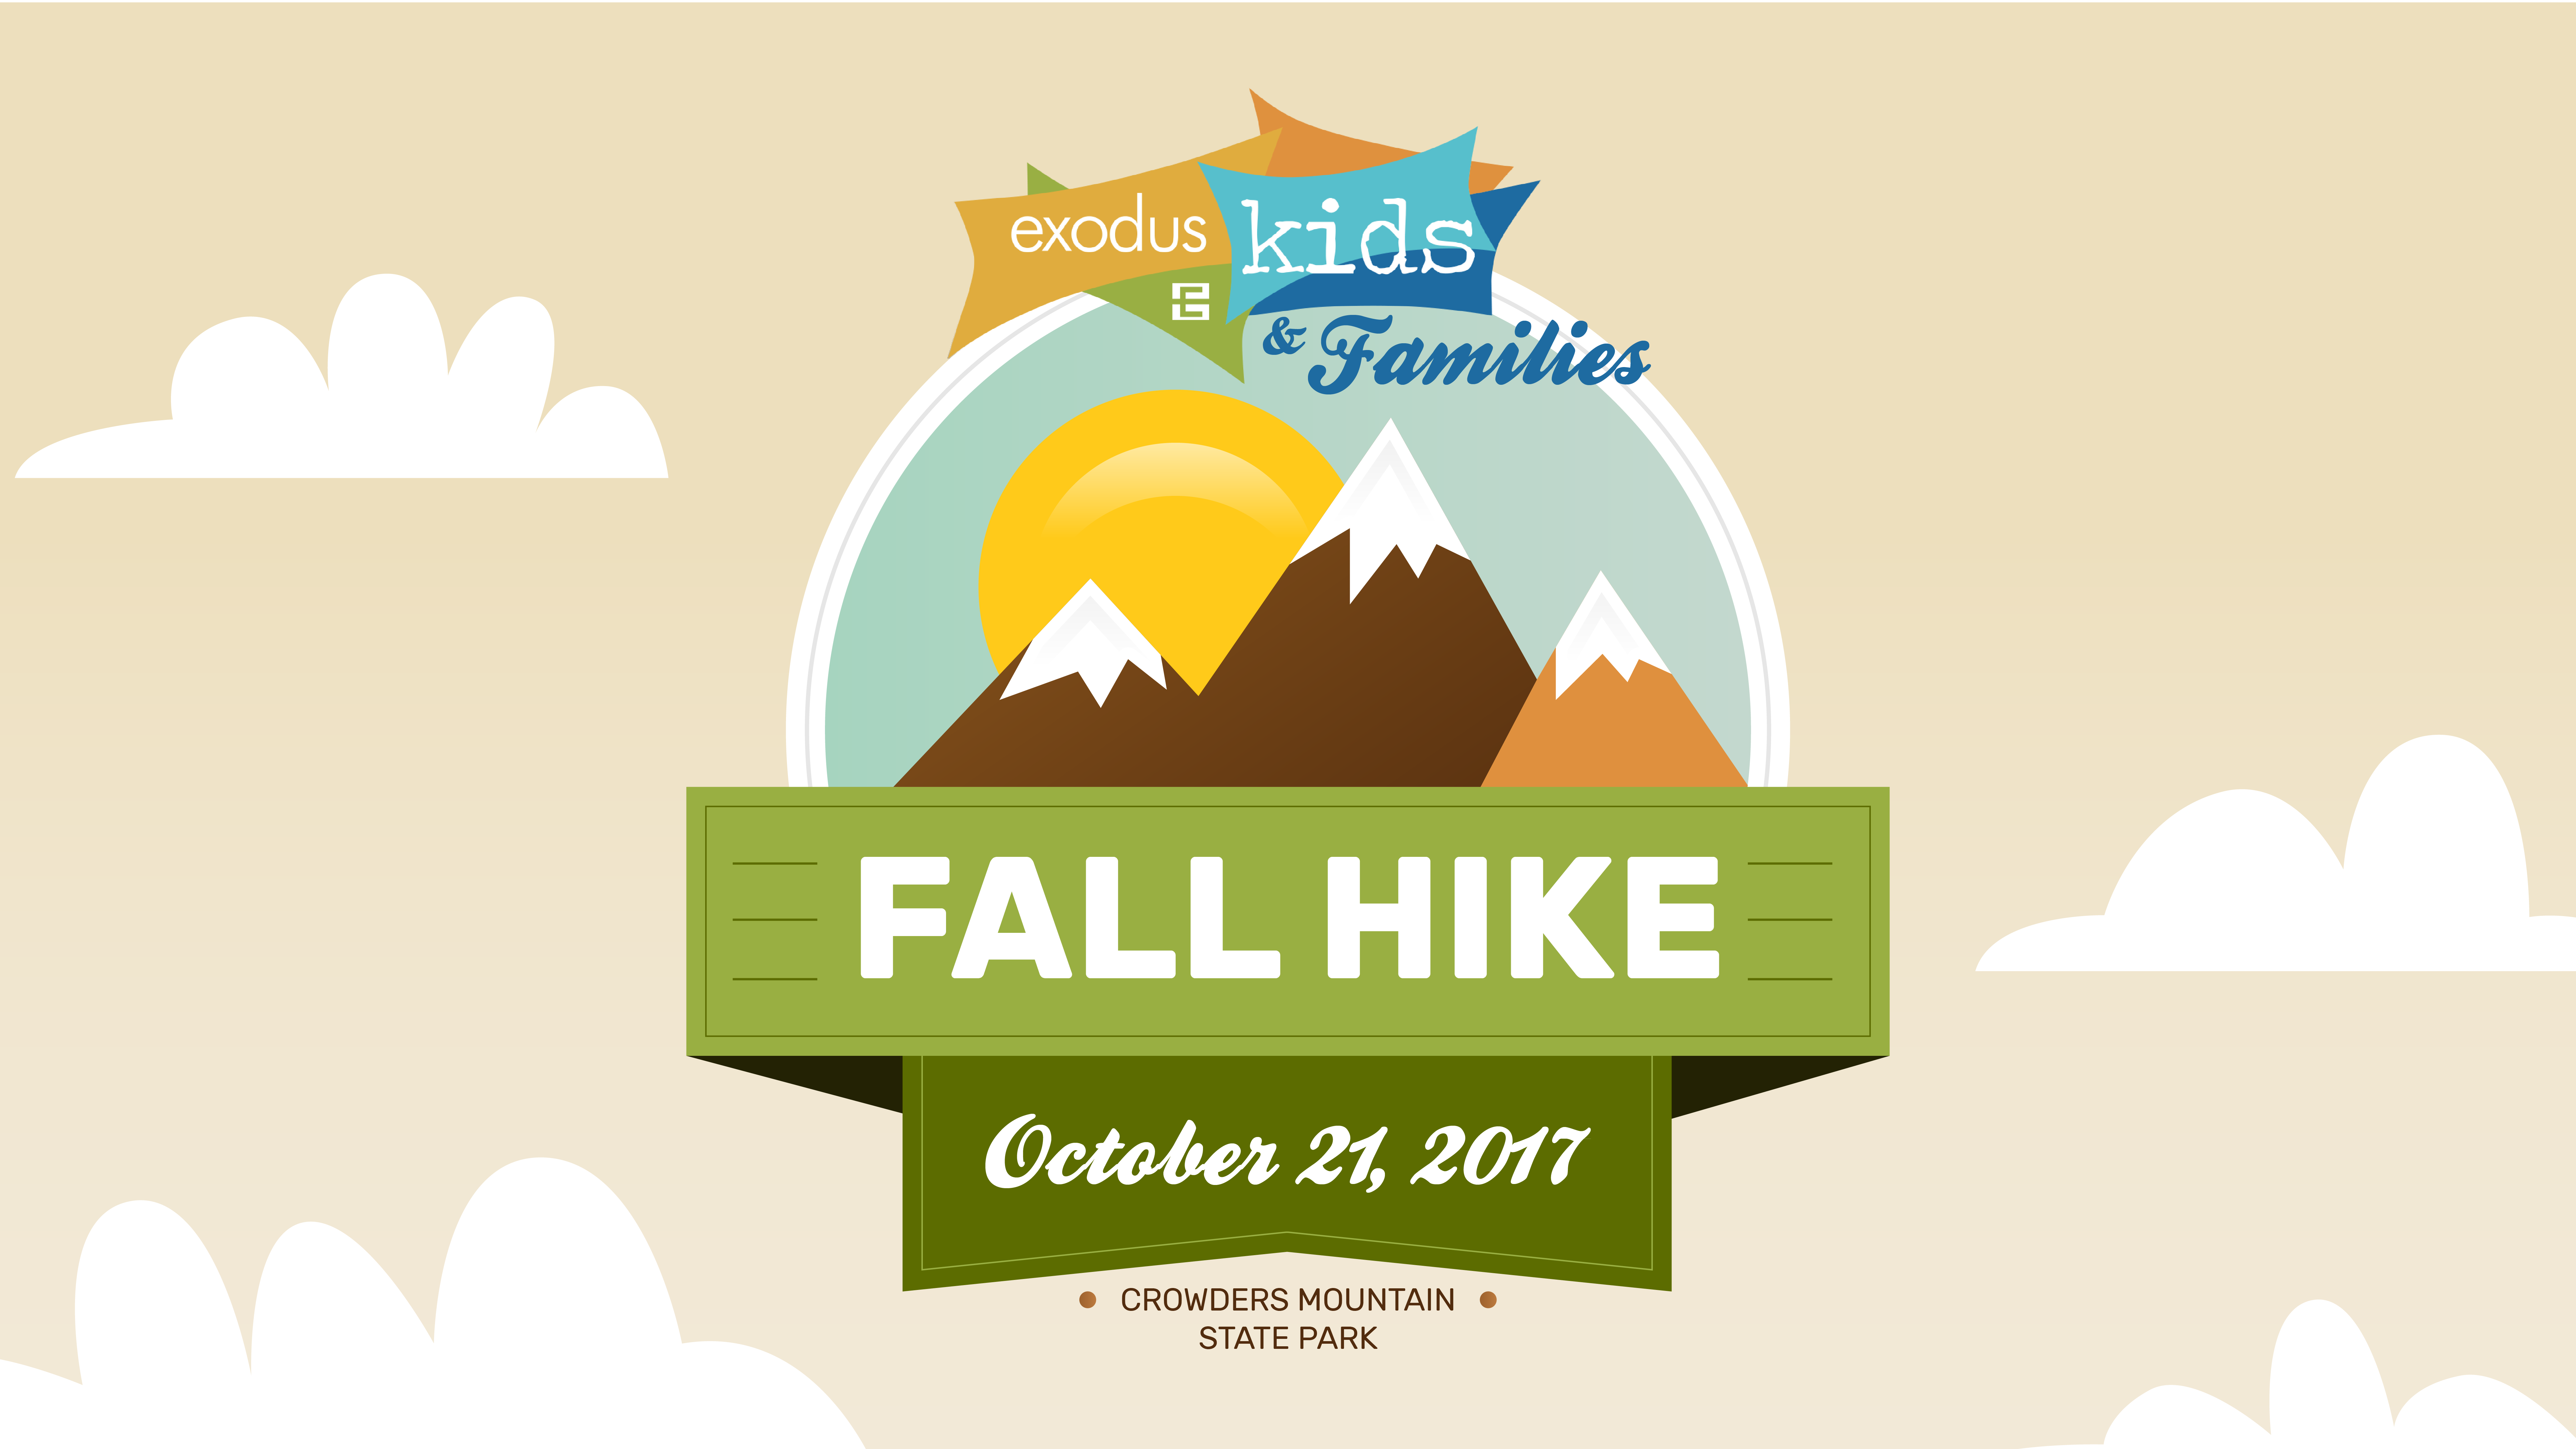 Exodus Kids & Families Annual Fall Hike – October 21